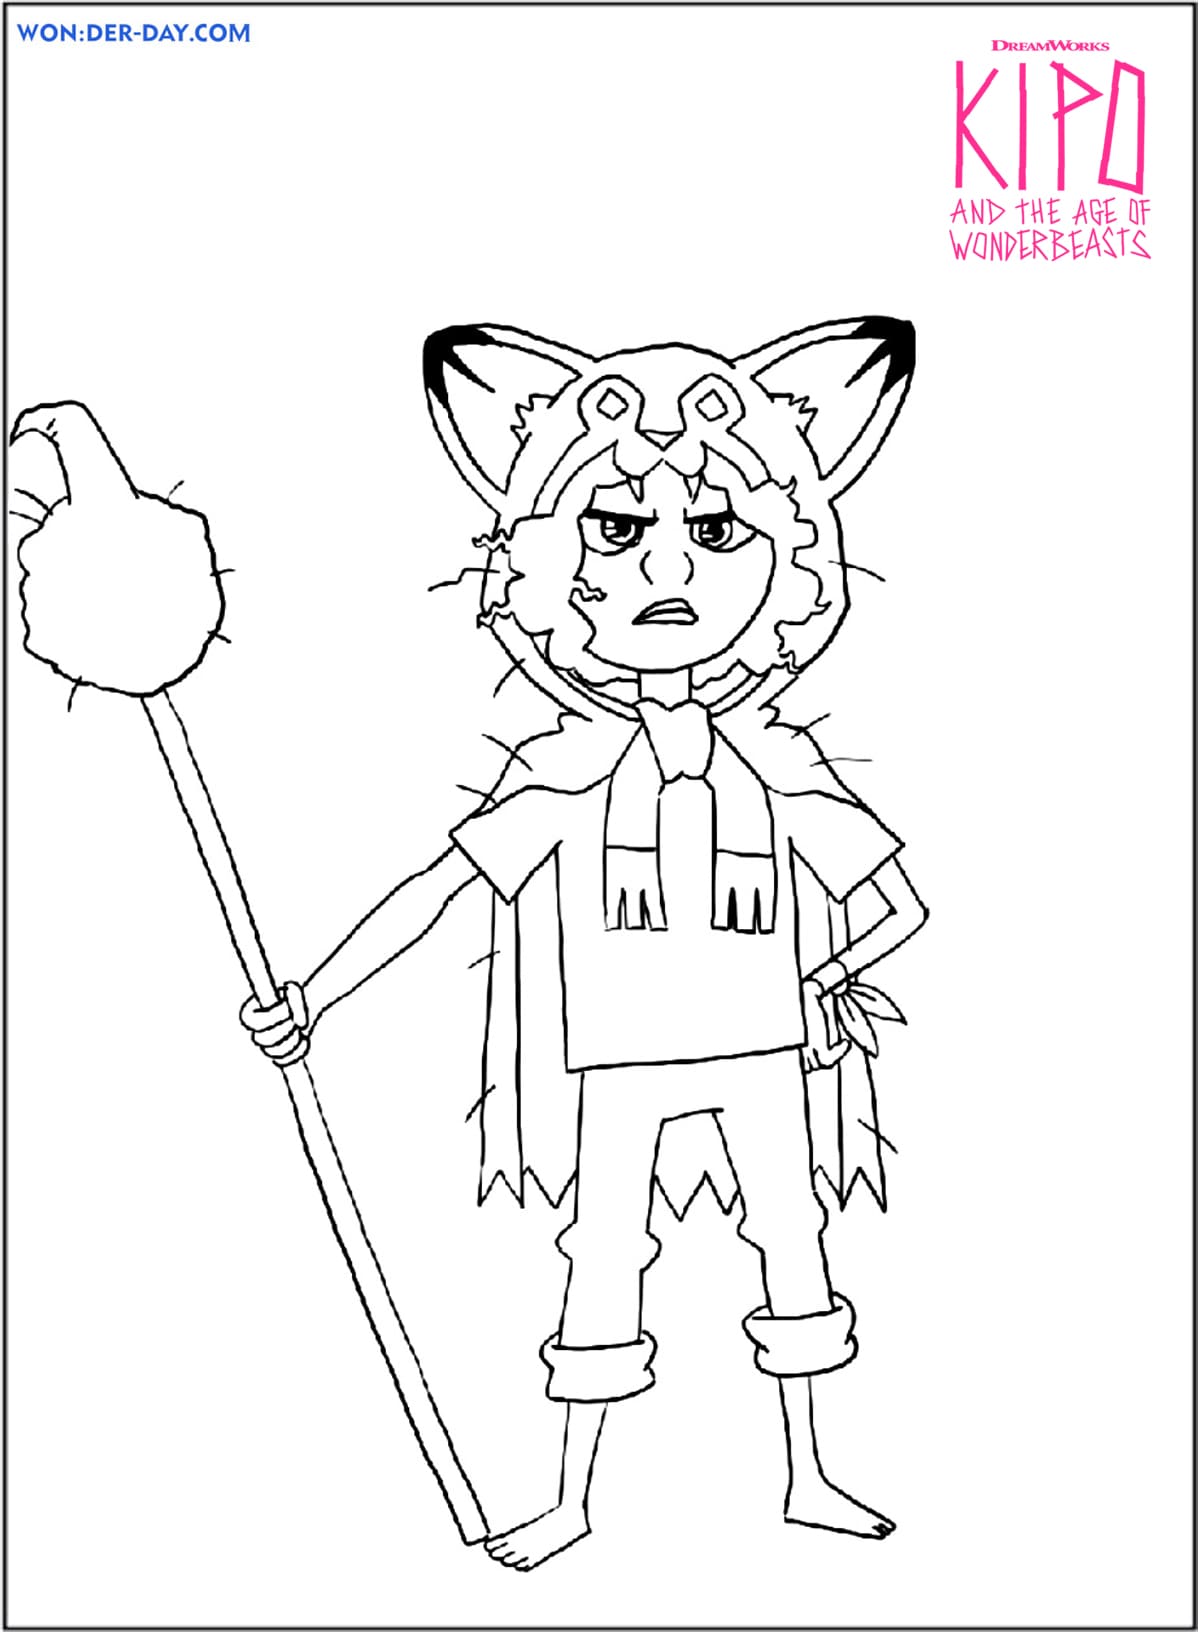 kipo and the age of wonderbeasts coloring pages wonder day coloring